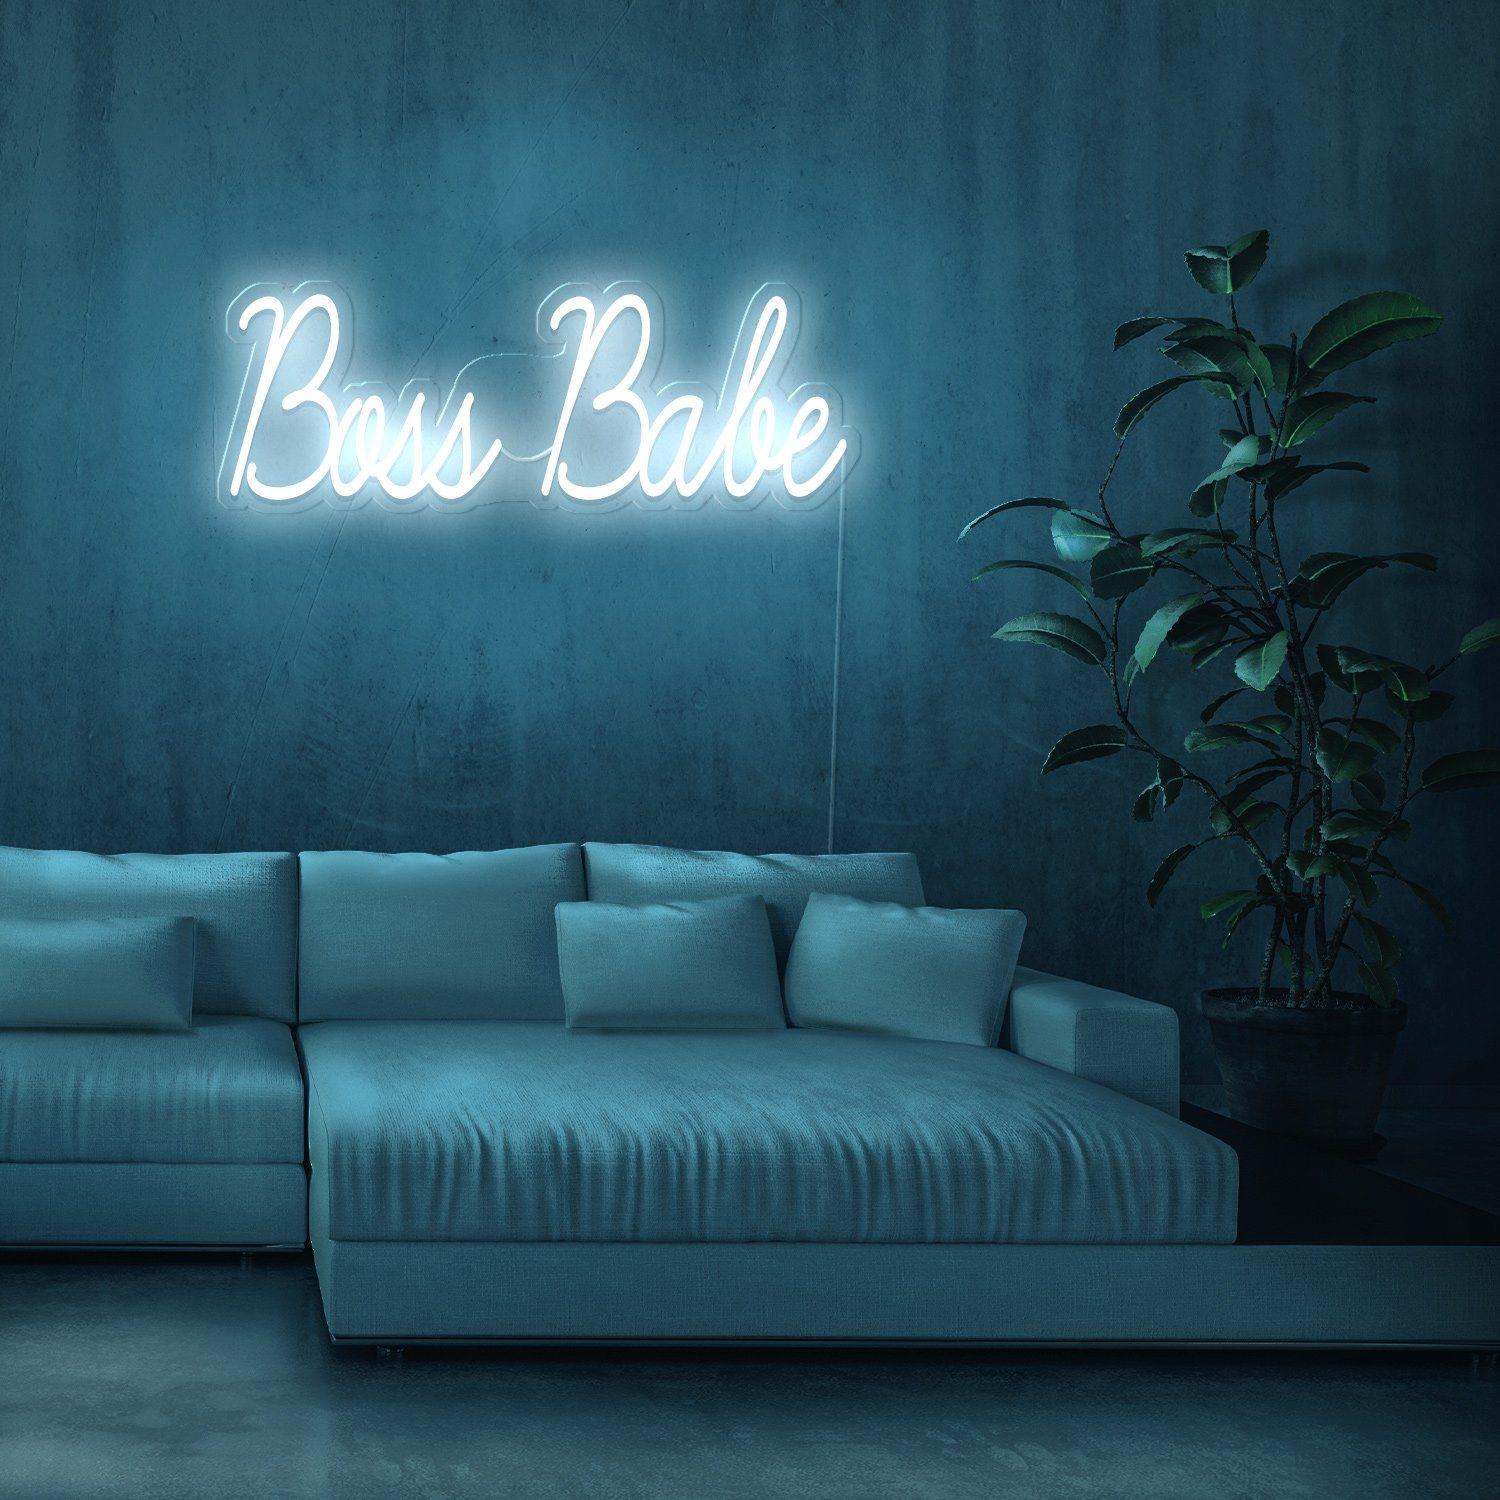 Boss Babe Neon Sign - NeonFerry